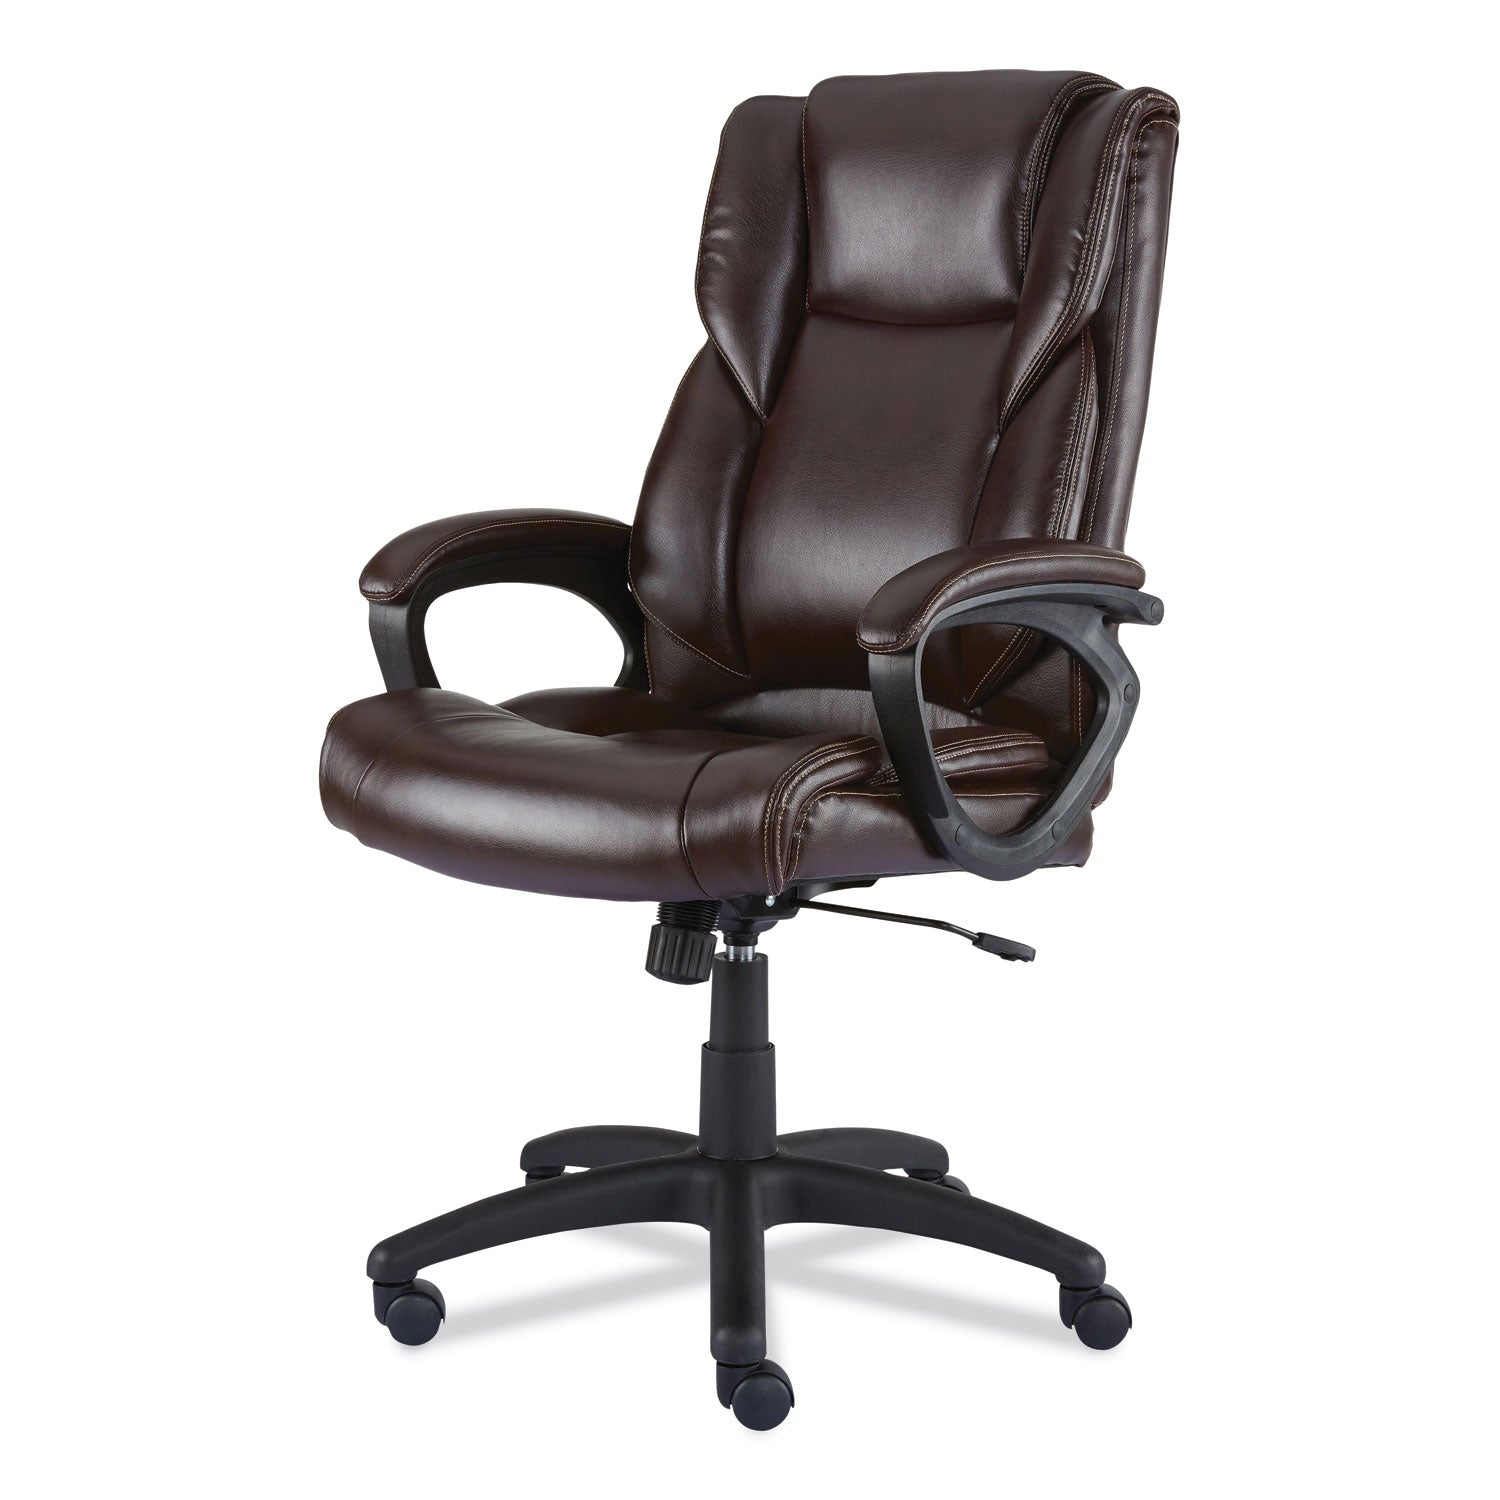 alera-brosna-series-mid-back-task-chair-supports-up-to-250-lb-1815-to-2177-seat-height-brown-seat-back-brown-base_alebrn42b59 - 2